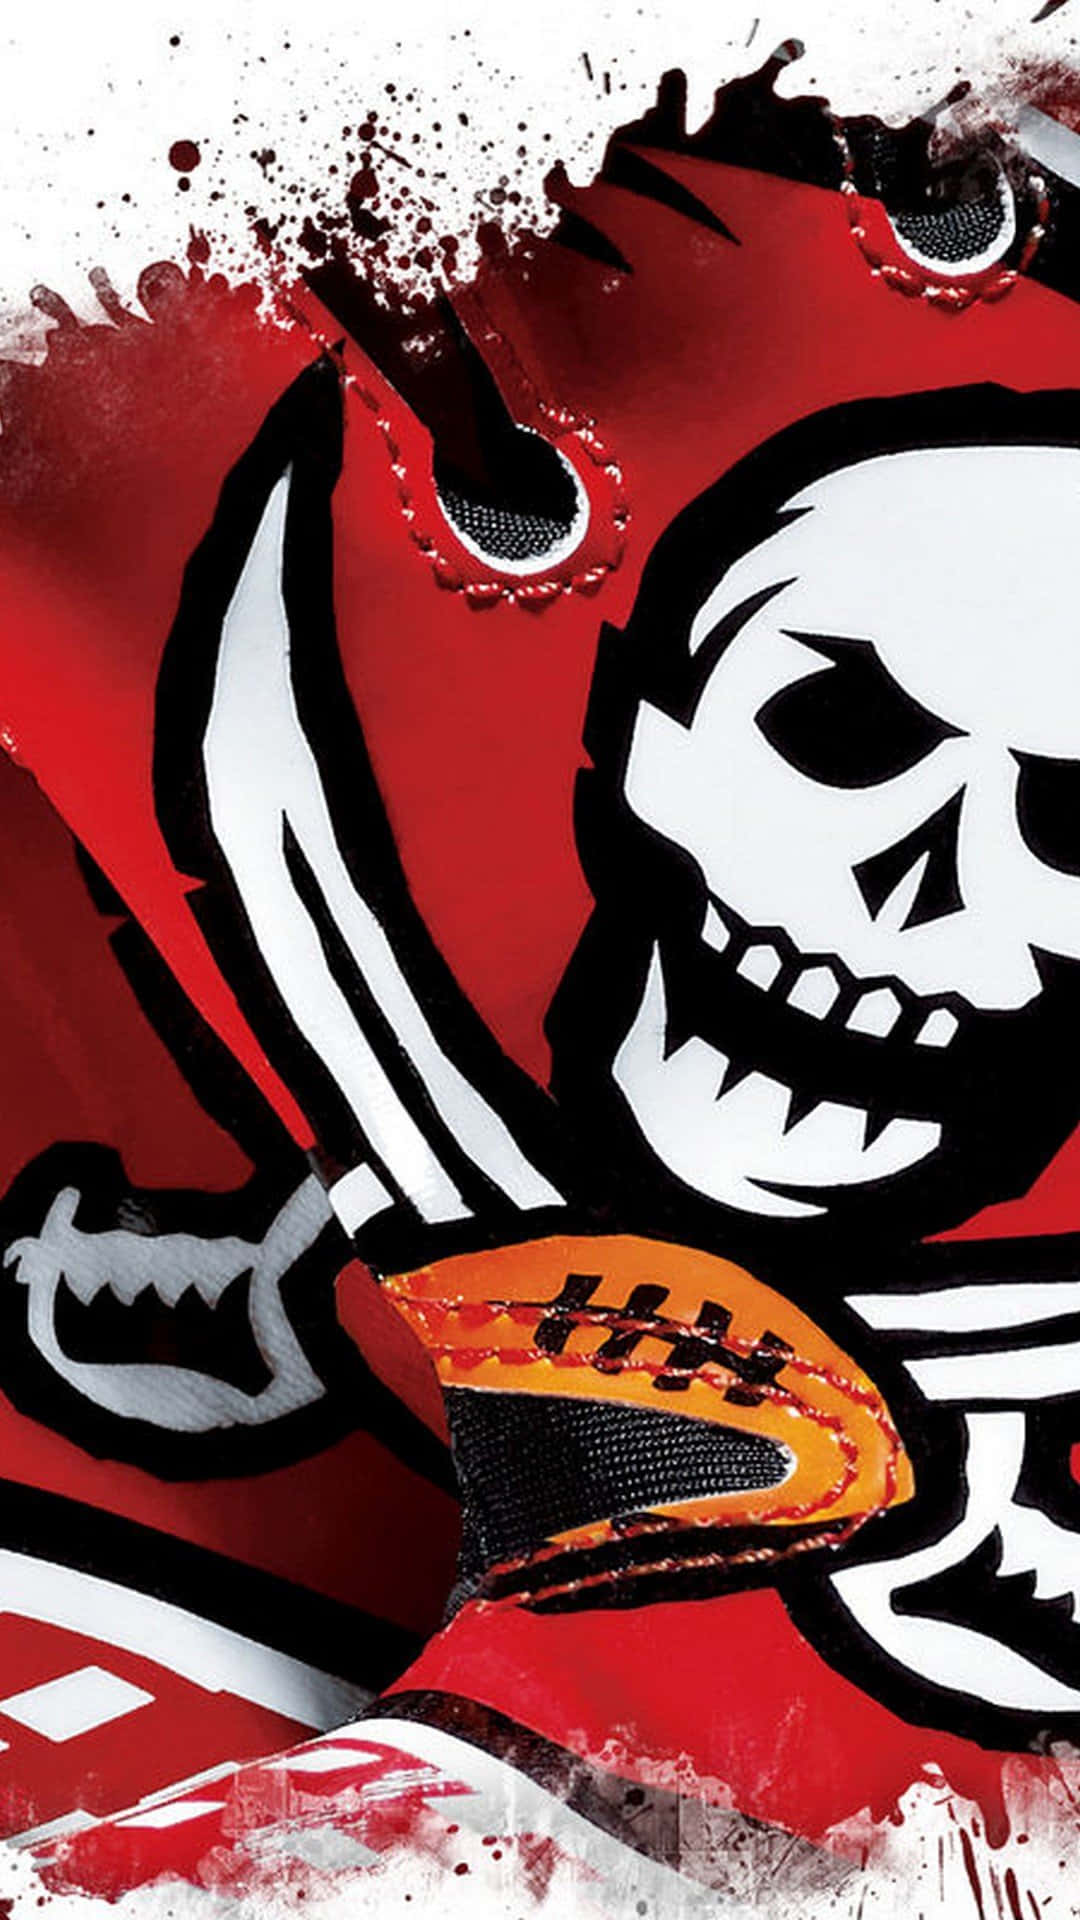 Get the official Tampa Bay Buccaneers app right on your iPhone! Wallpaper